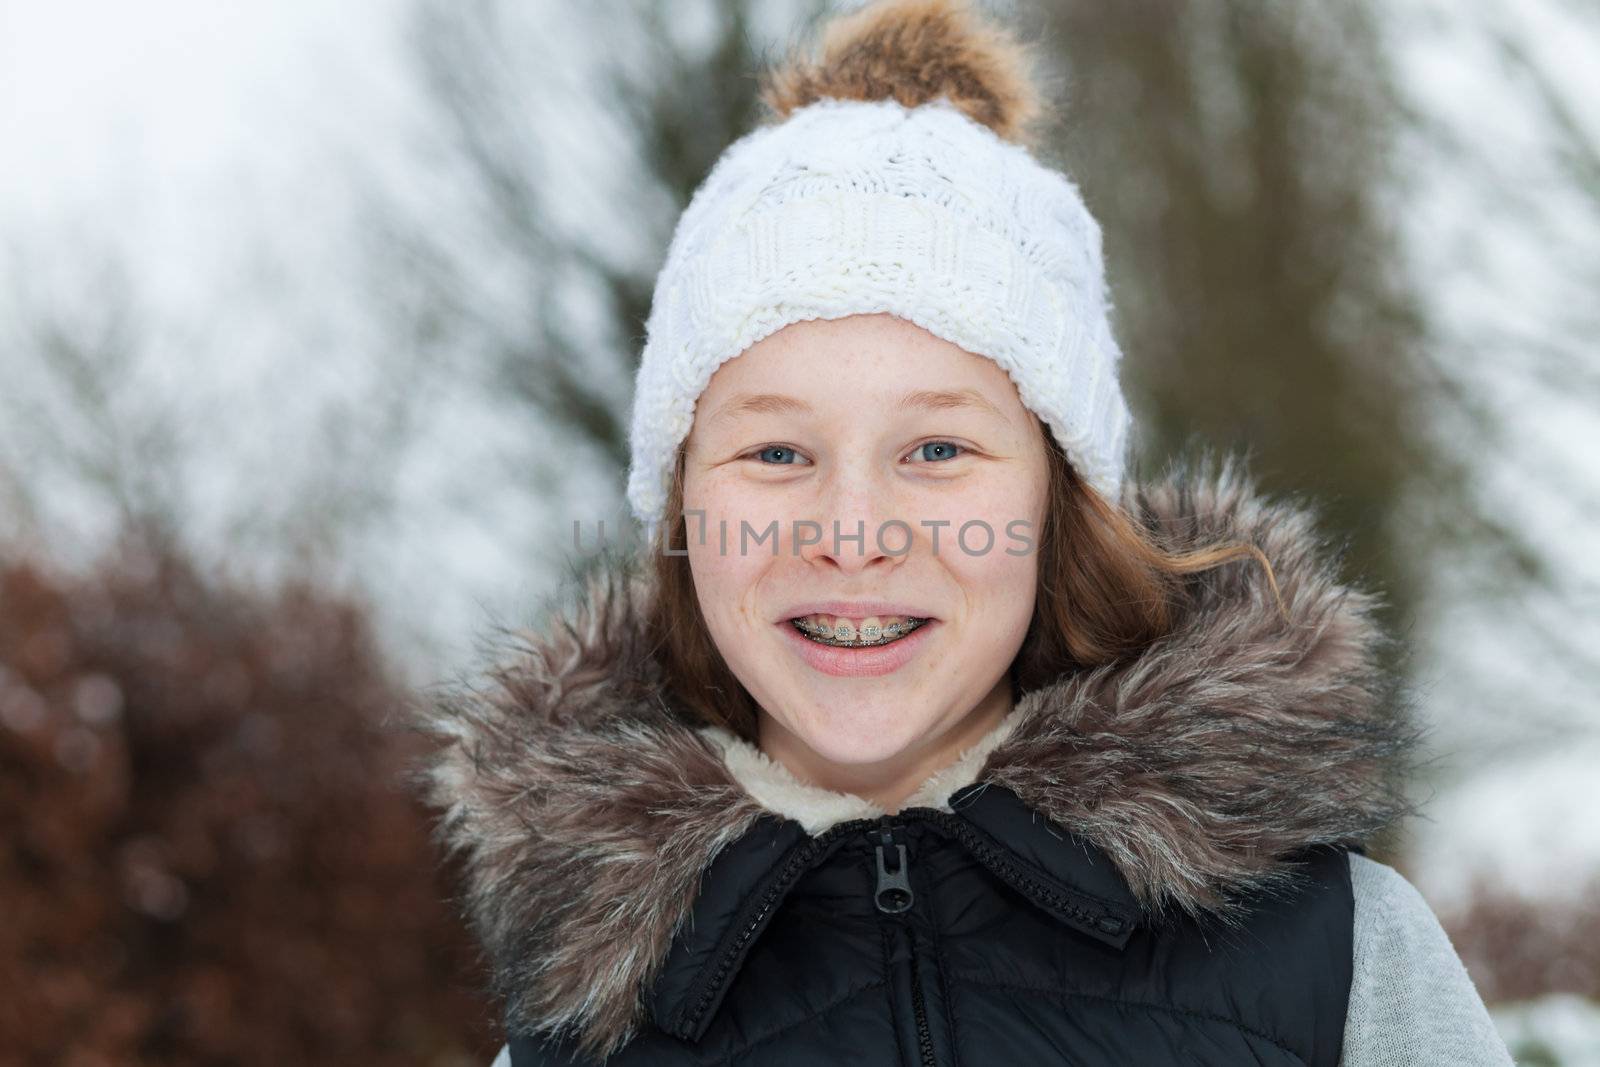 Outdoor portrait of a smiling teenager girl in winter clothing